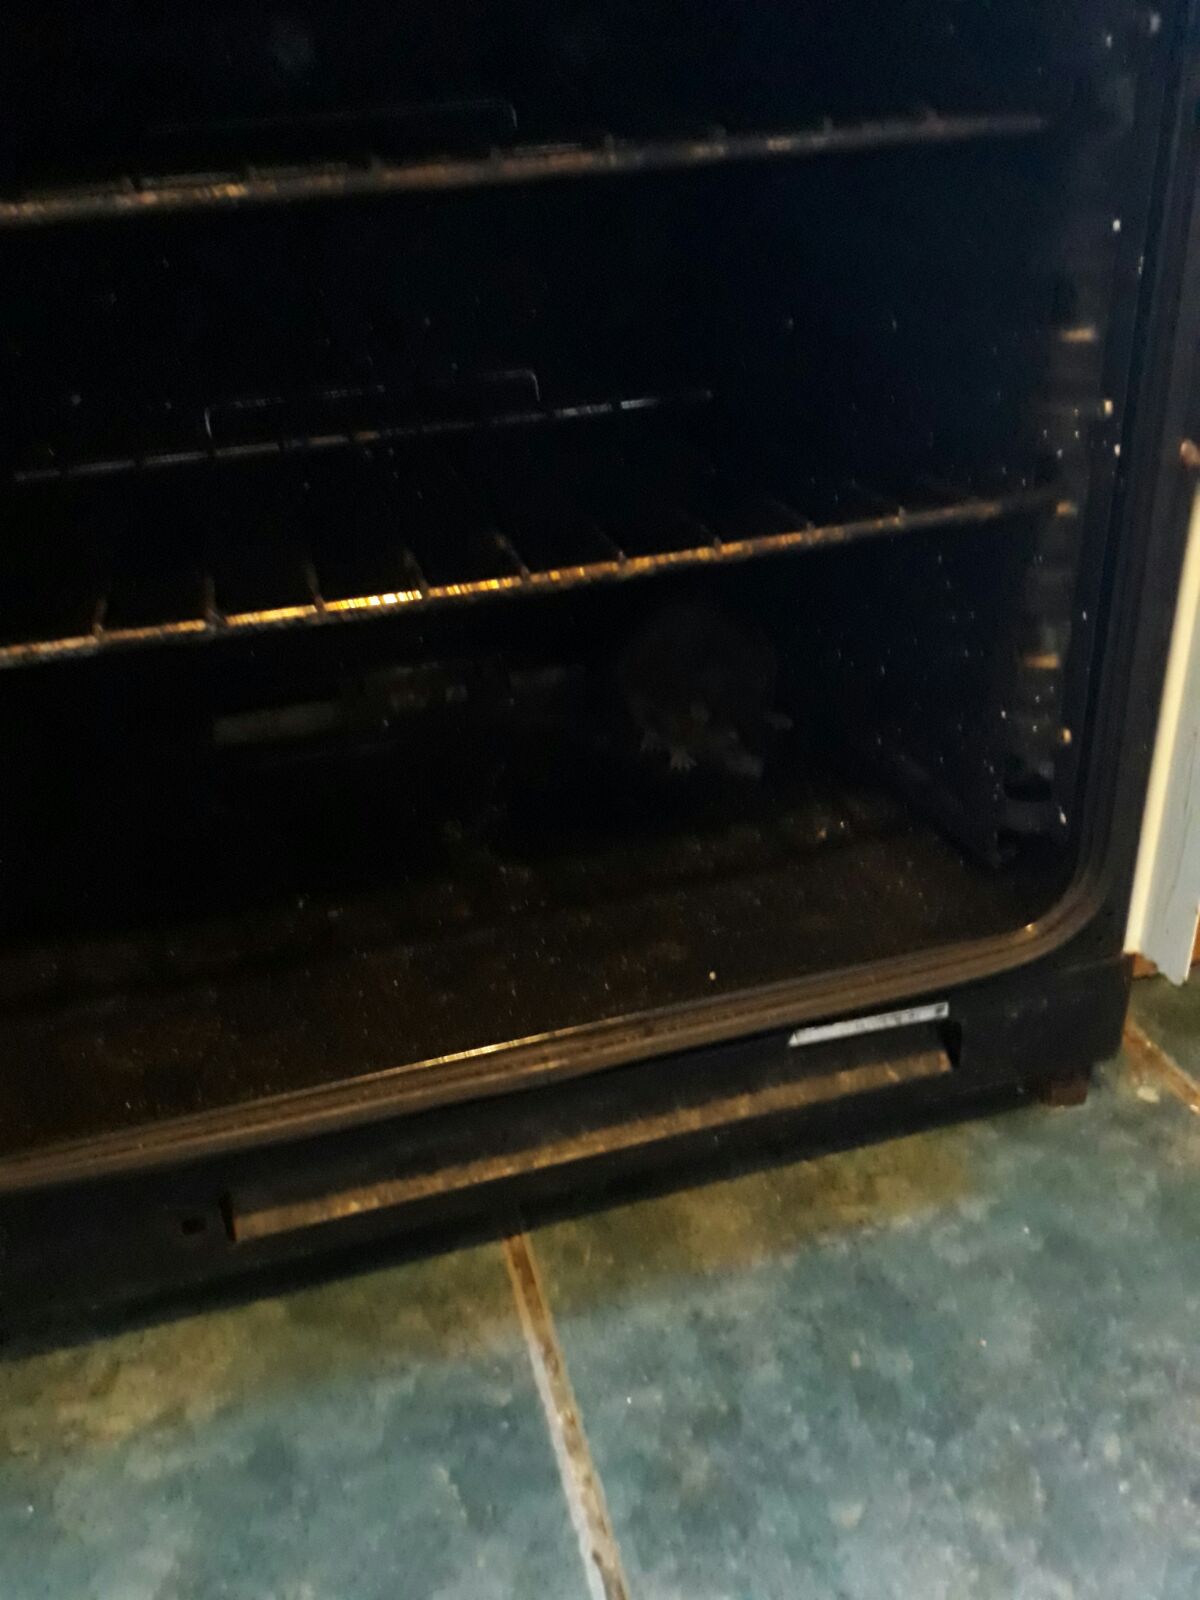 Oven containing a rat © J. Grayson